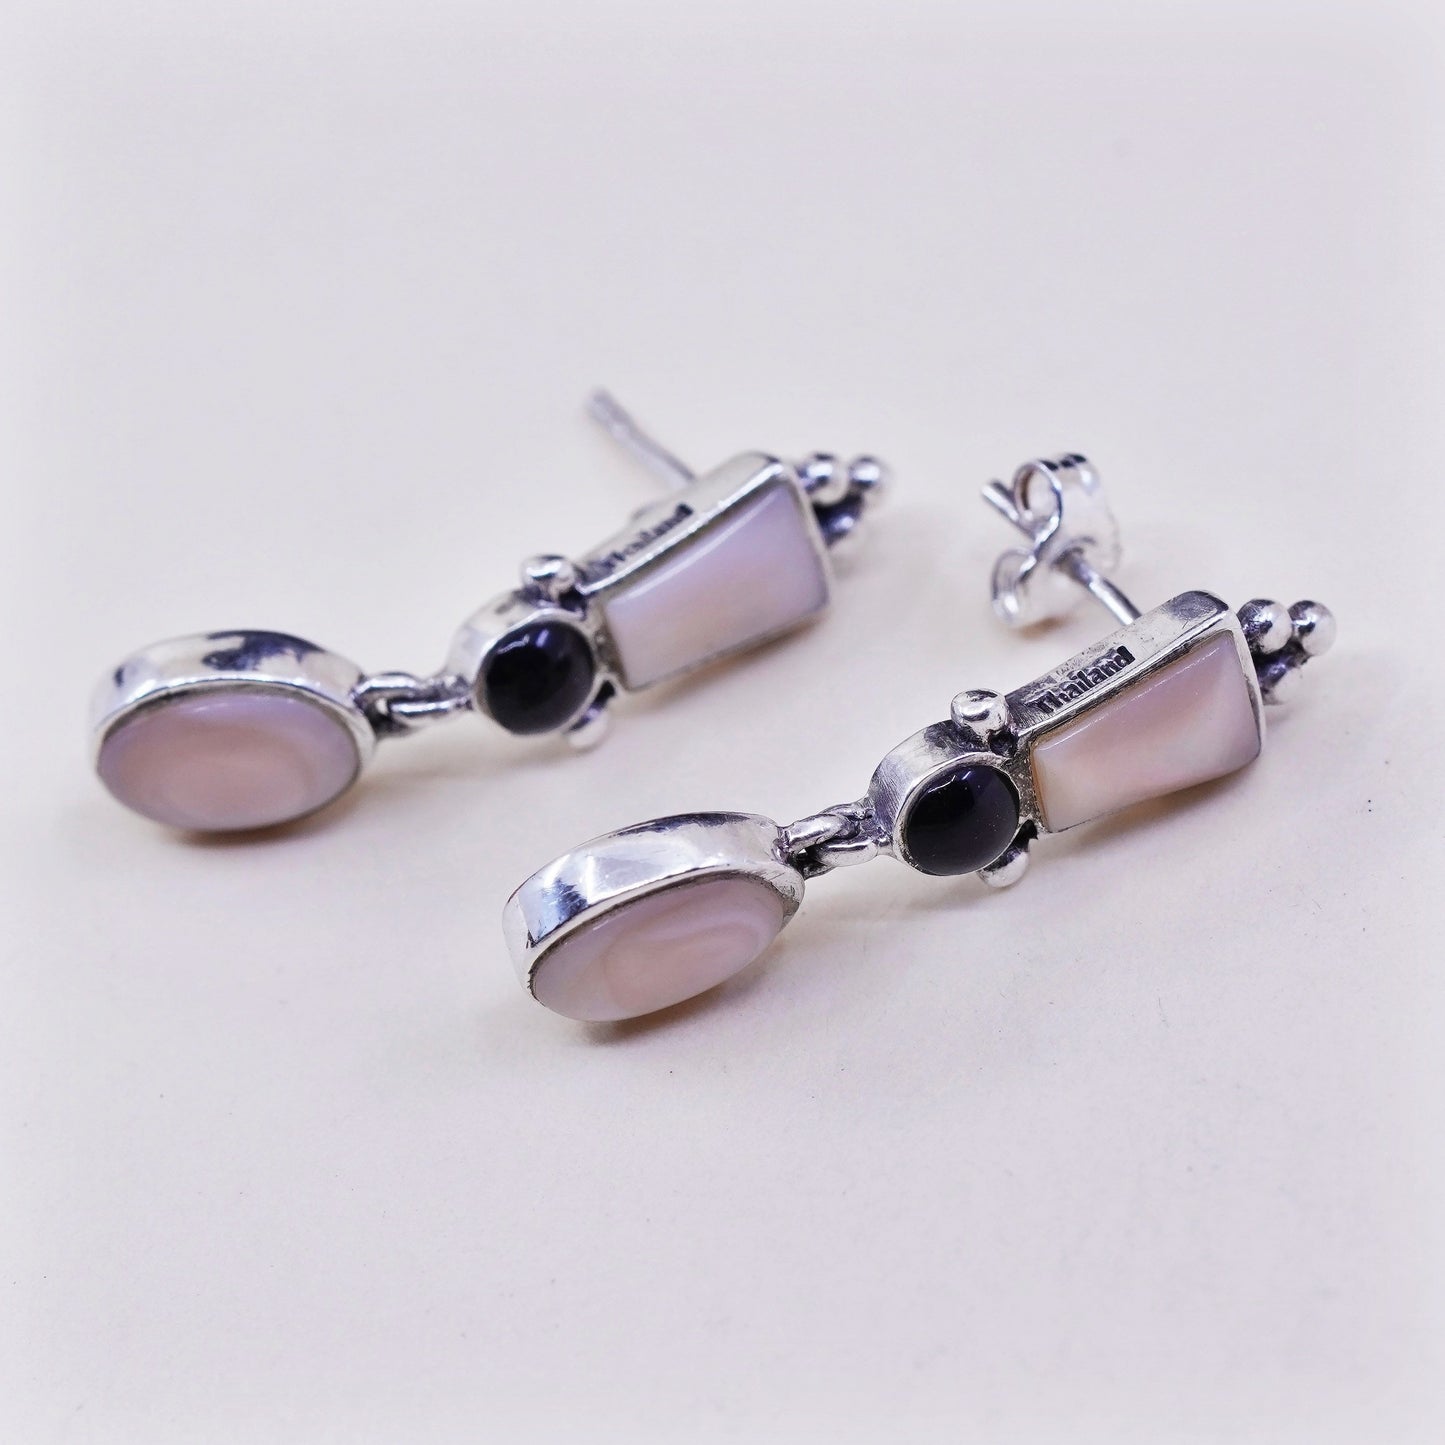 Vintage Sterling 925 silver handmade earrings with mother of pearl and obsidian